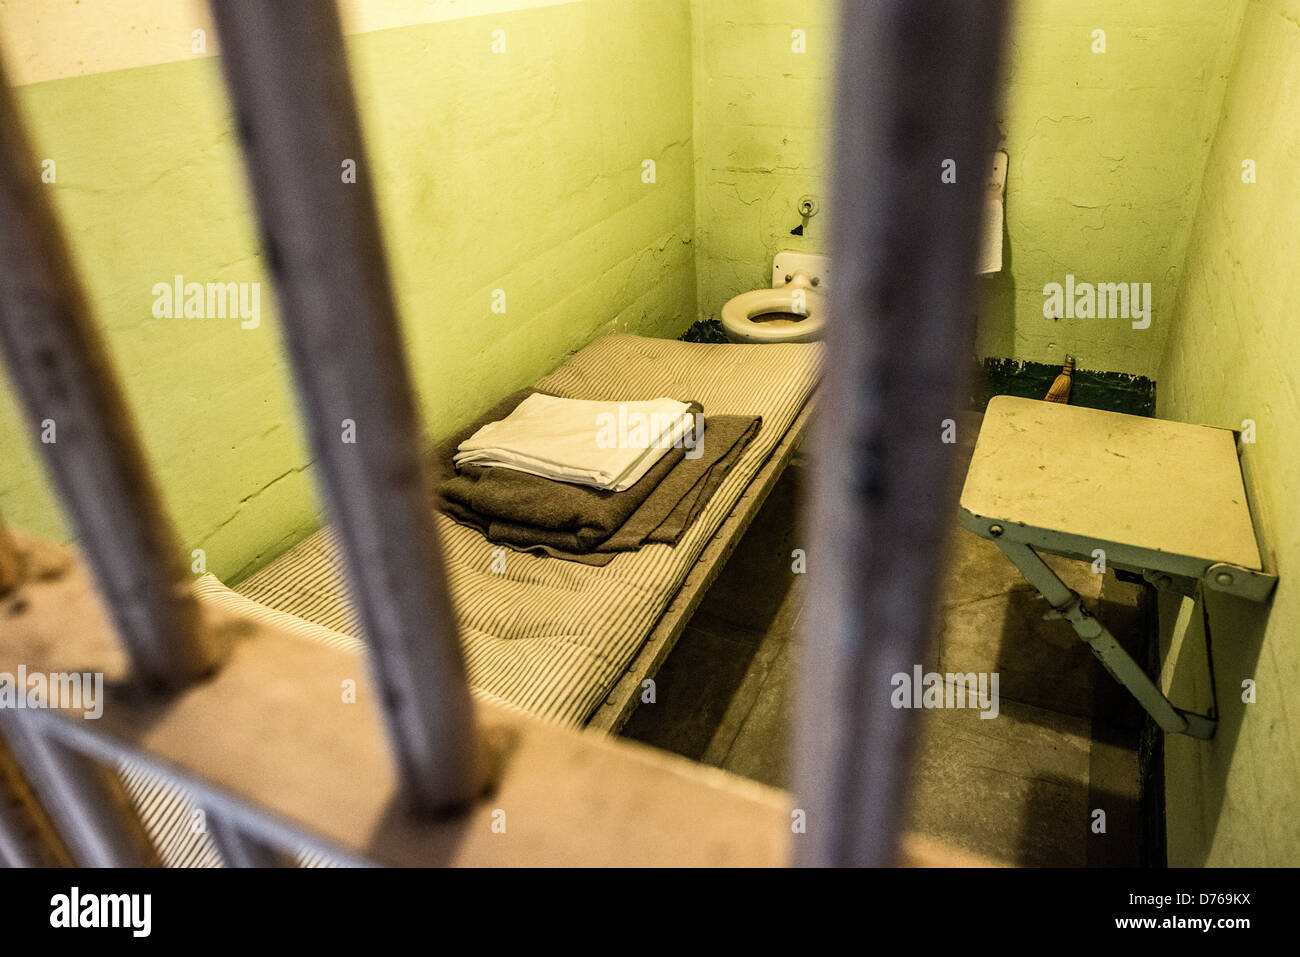 SAN FRANCISCO, California - The interior of one of the cells of the famous prison of Alcatraz, on Alcatraz Island on San Francisco Bay. Stock Photo